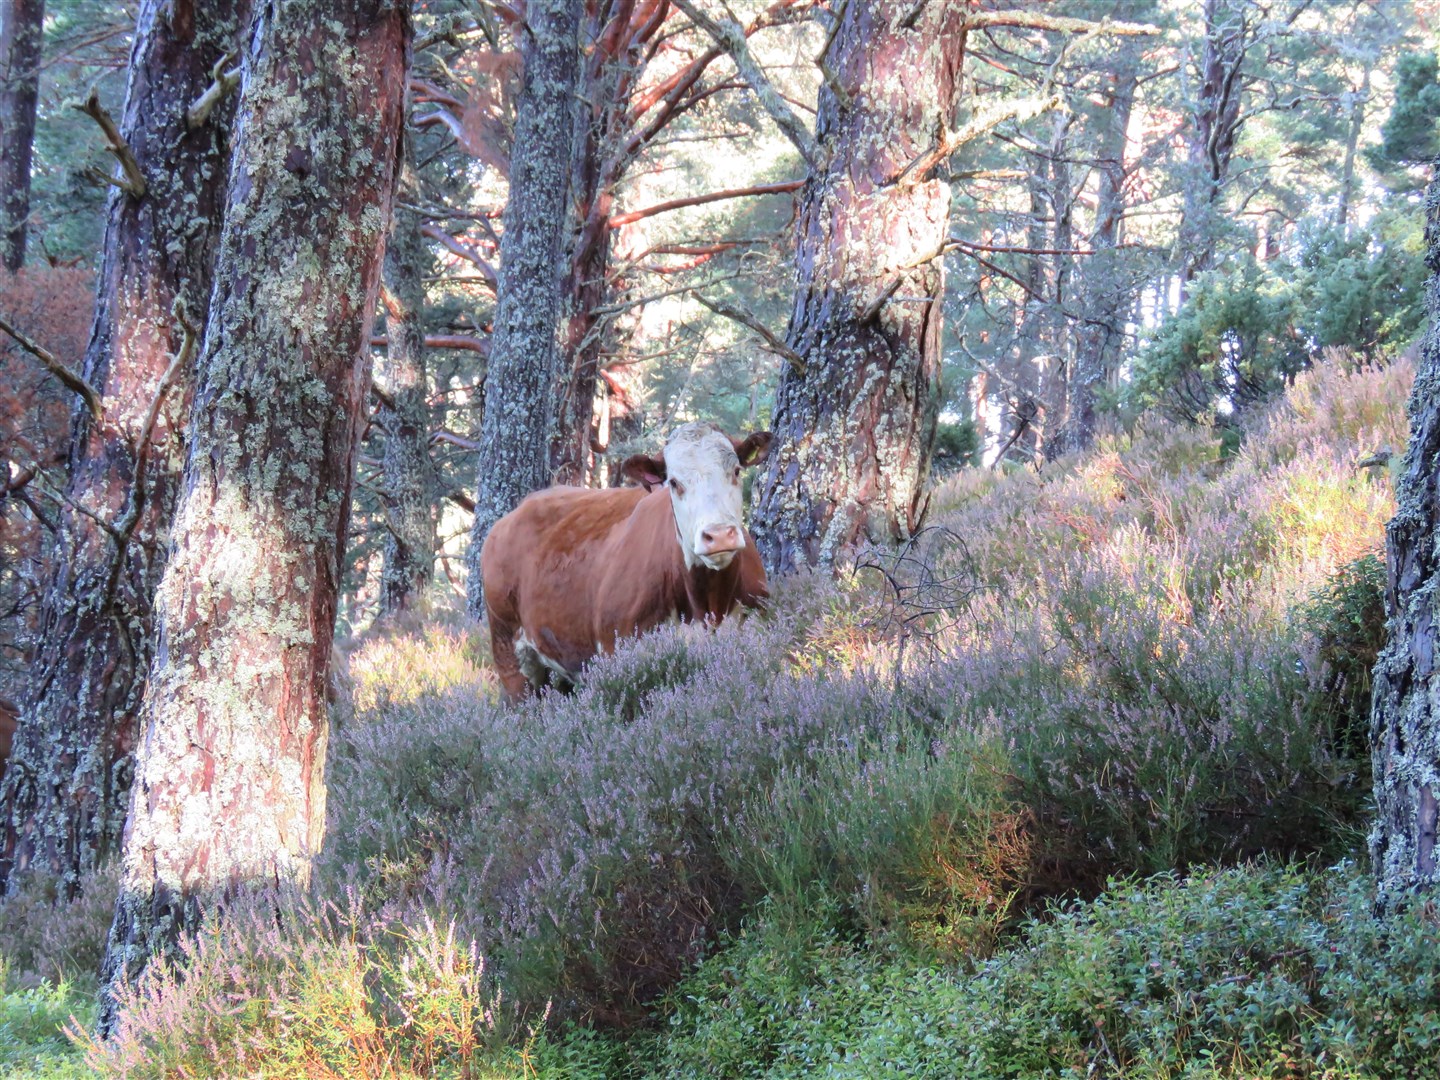 Cattle have been moved on site to help with the bid to safeguard capercaillie.